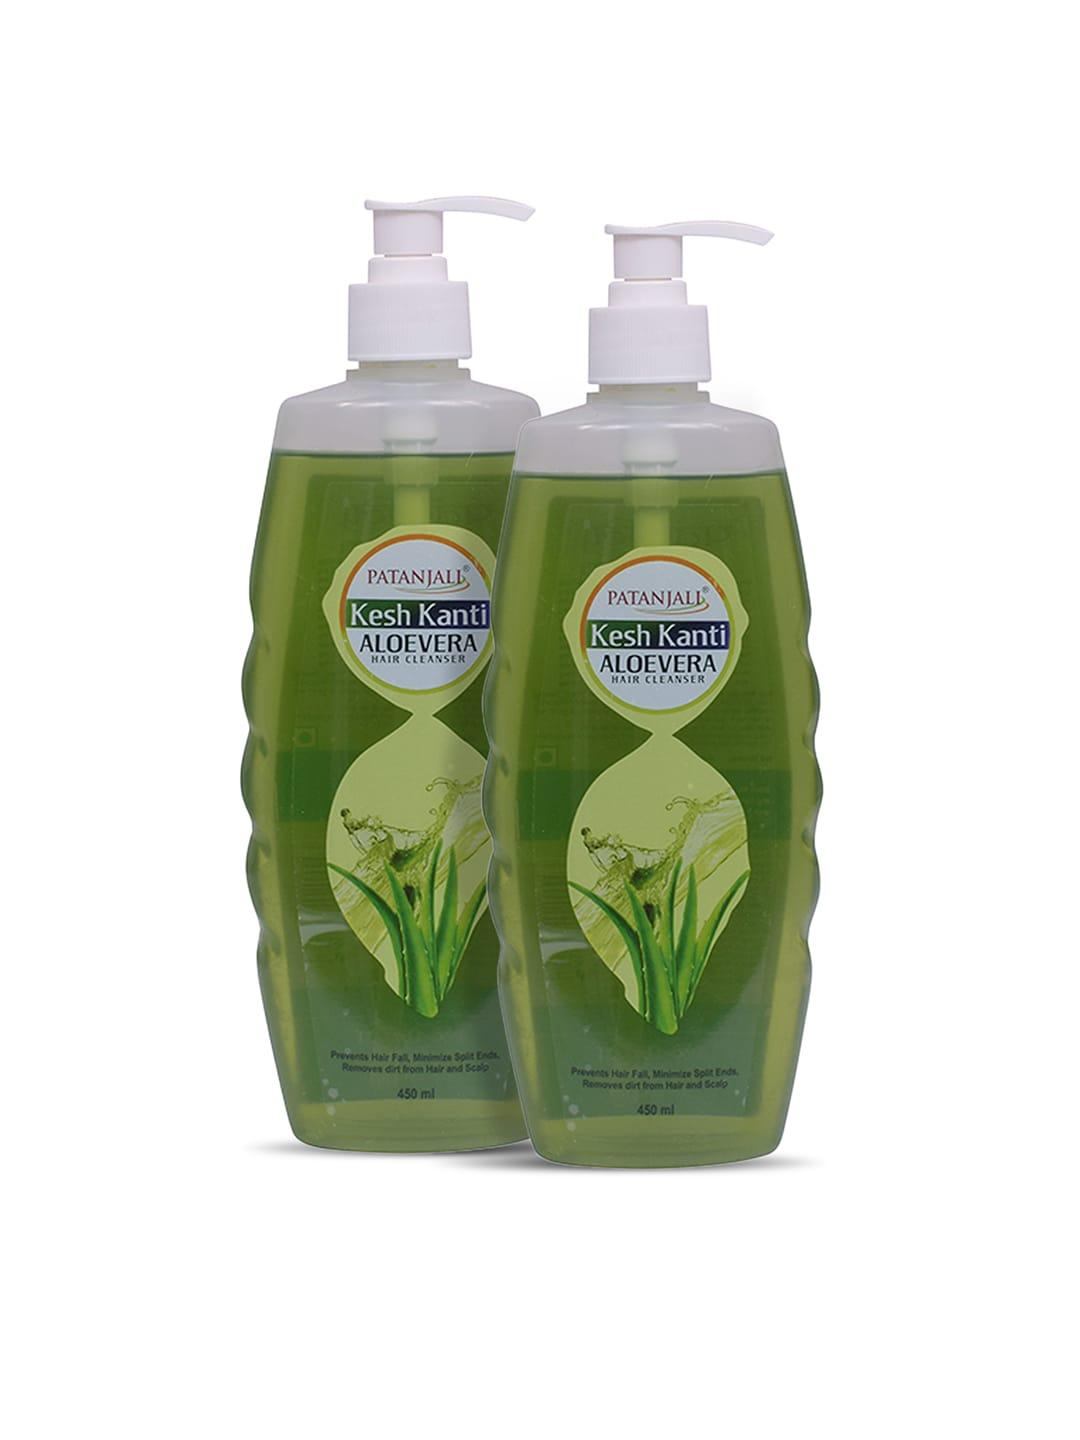 patanjali set of 2 kesh kanti aloe vera hair cleanser with phyto protein - 450 ml each